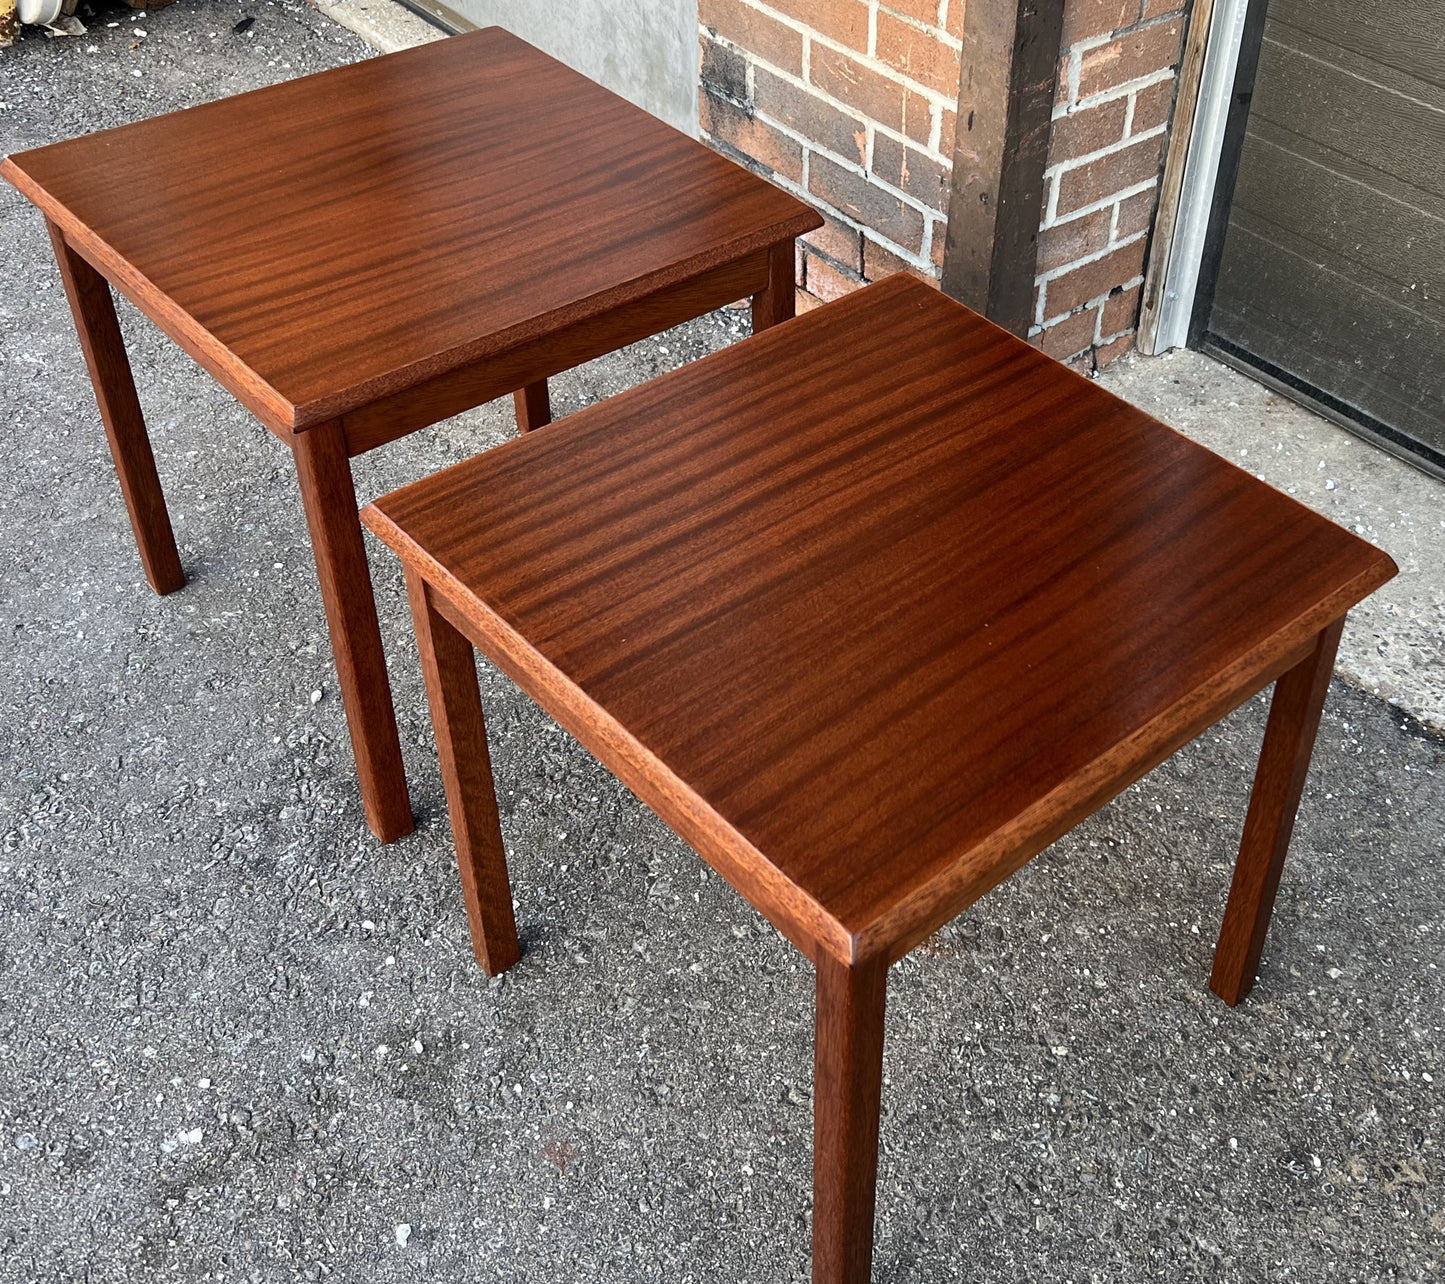 REFINISHED Set of Danish Mid Century Modern coffee table & 2 end tables